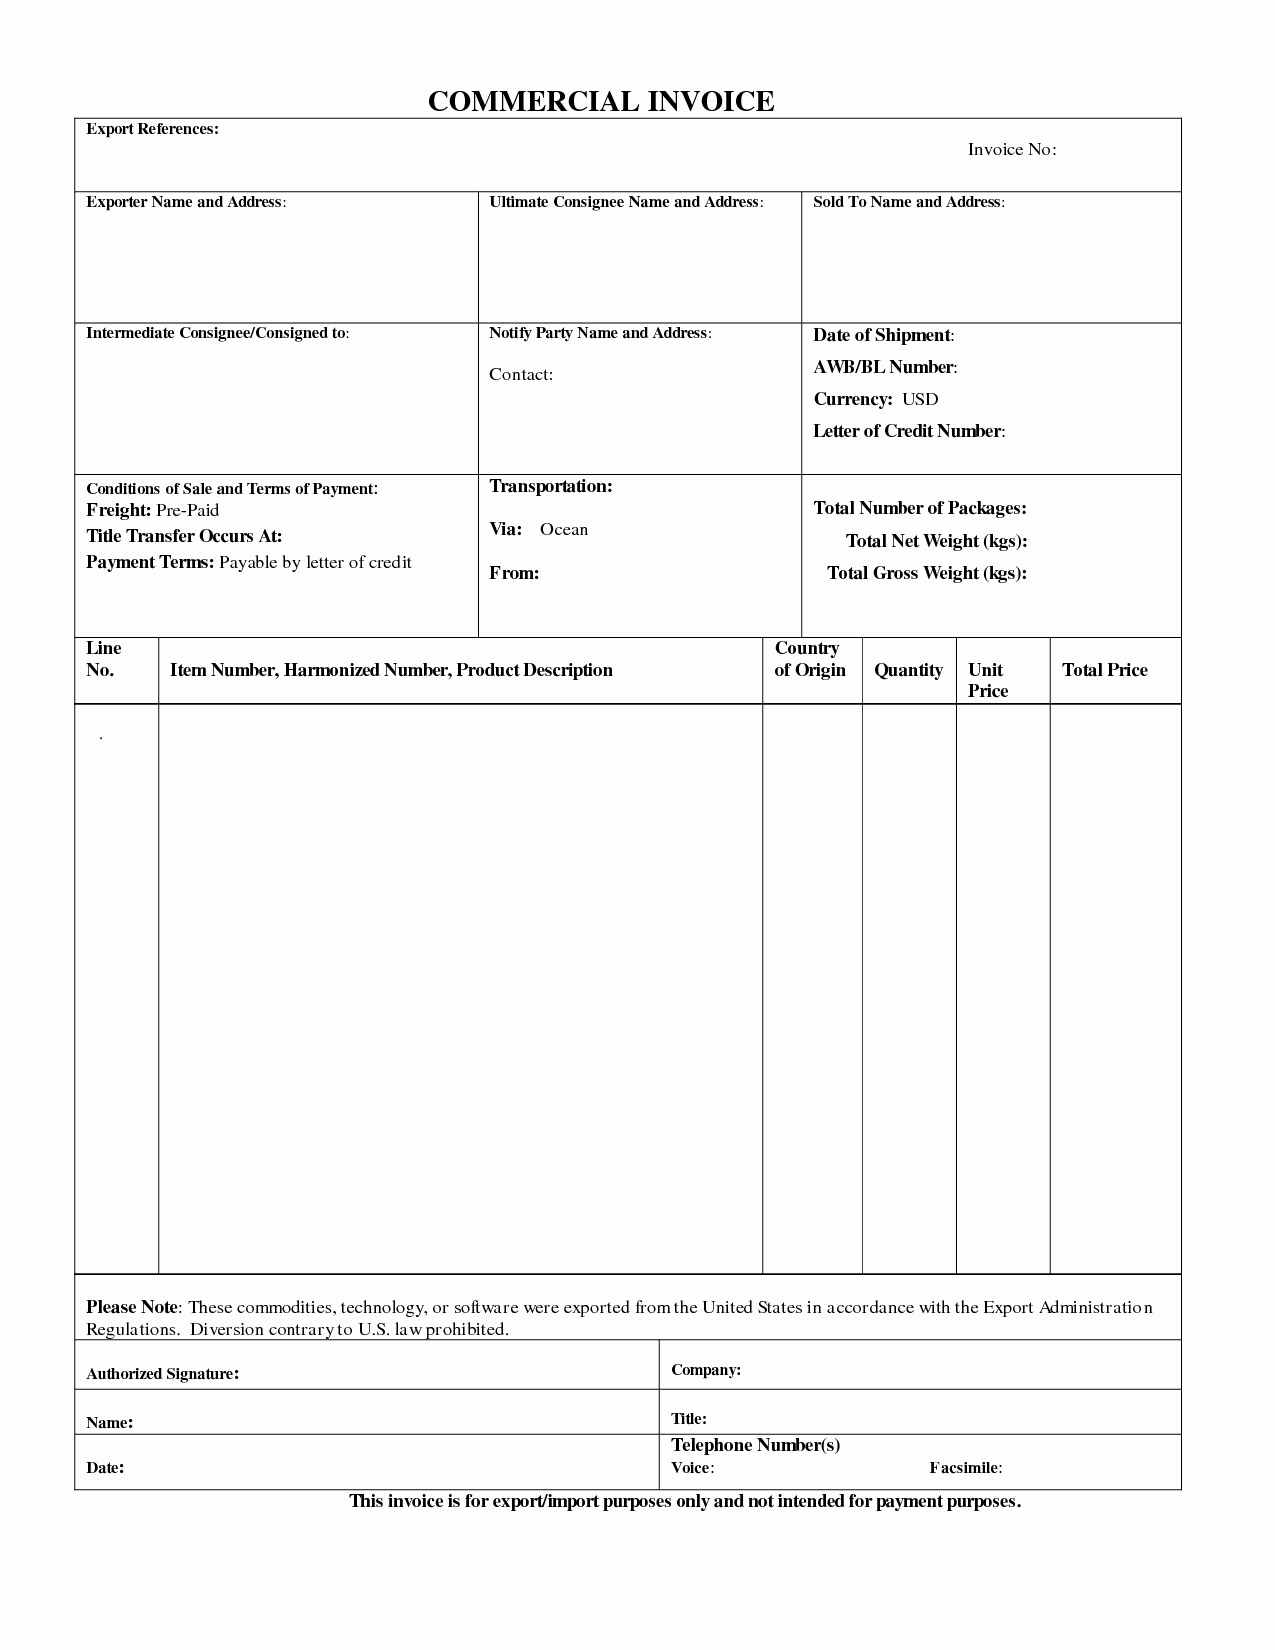 Export Commercial Invoice Template New Mercial Export Invoice Sample Business form